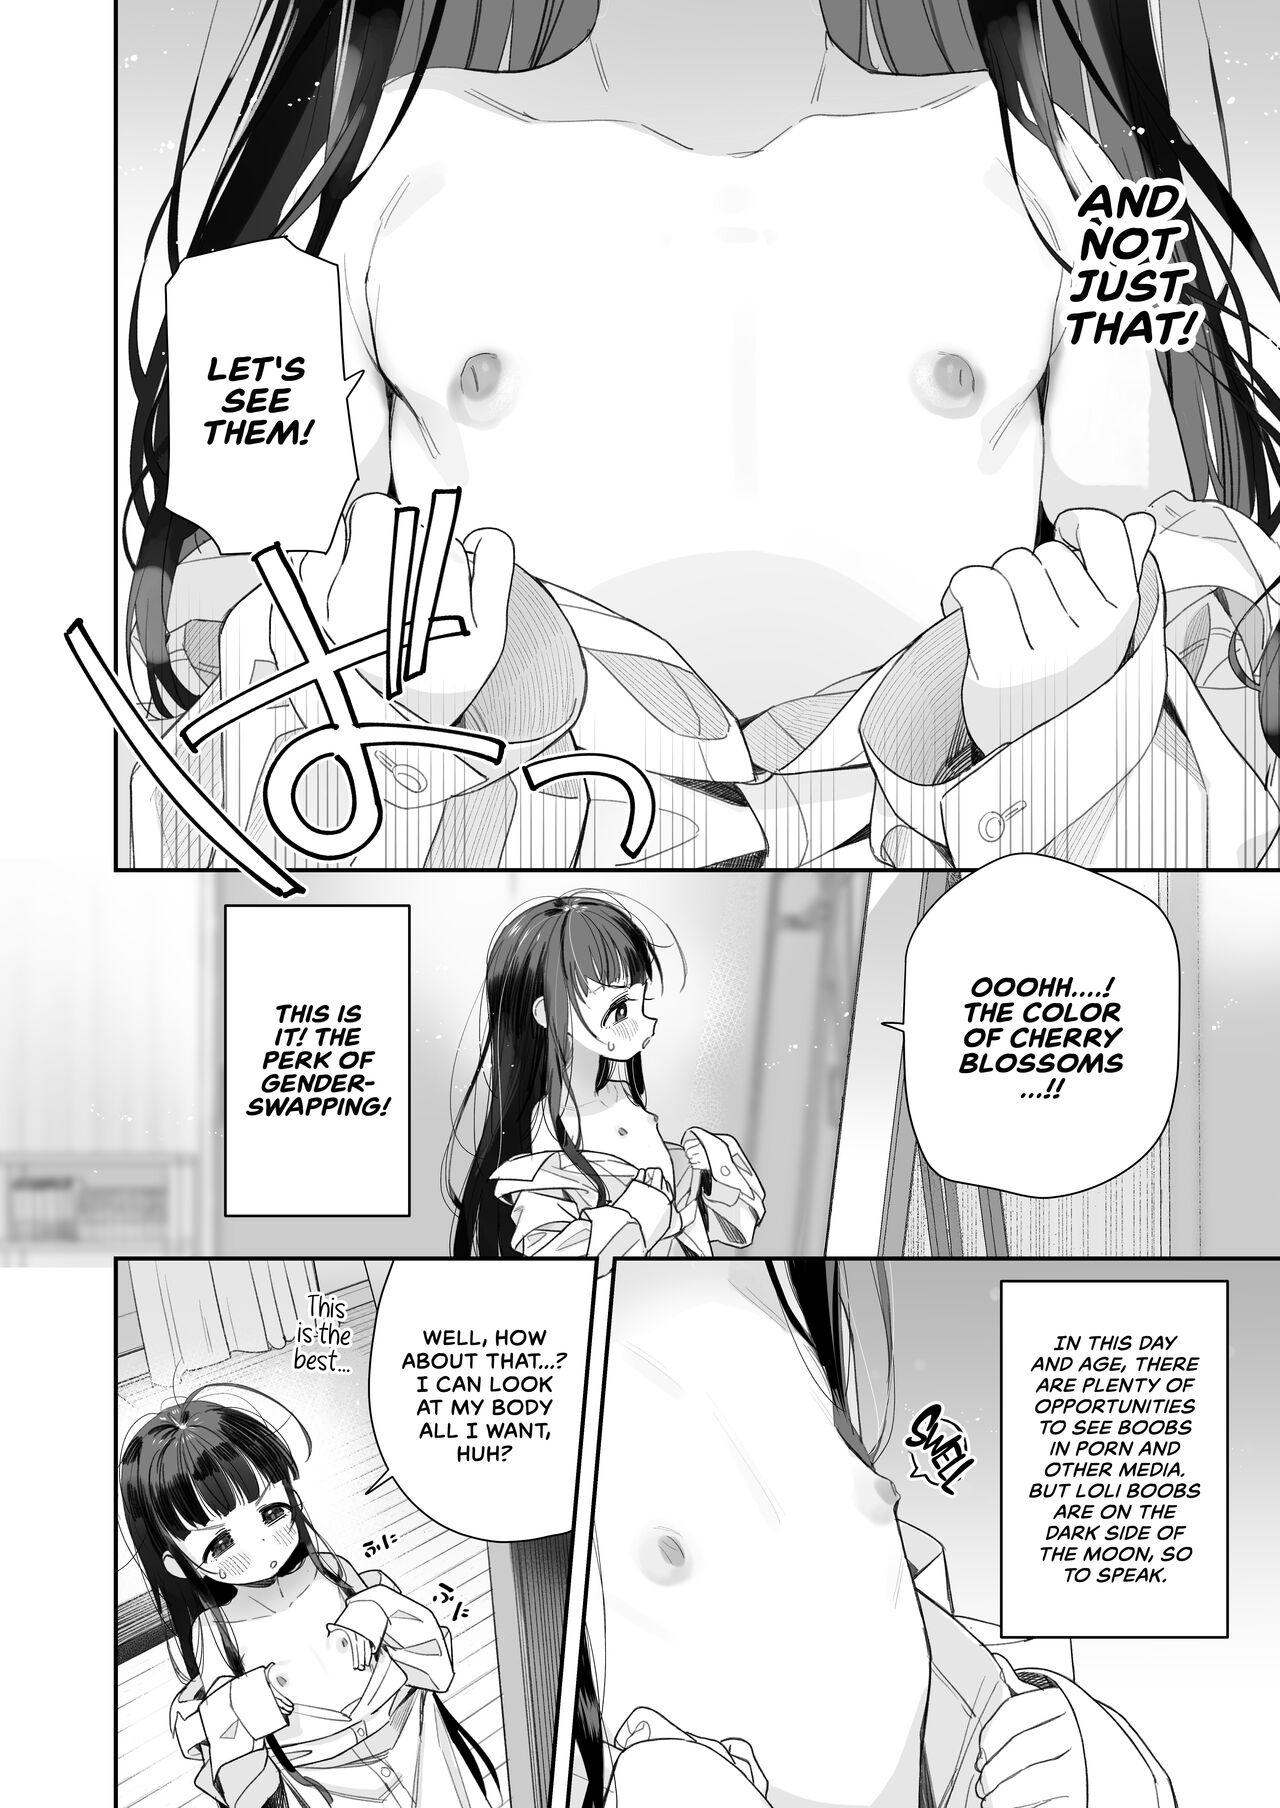 Slut Porn [Asunaro Neat. (Ronna)] TS Loli Oji-san no Bouken Onanie Hen | The Adventures of an Old Man Who Was Gender-Swapped Into a Loli ~Masturbation Chapter~ [English] [CulturedCommissions] [Digital] - Original Whooty - Page 7